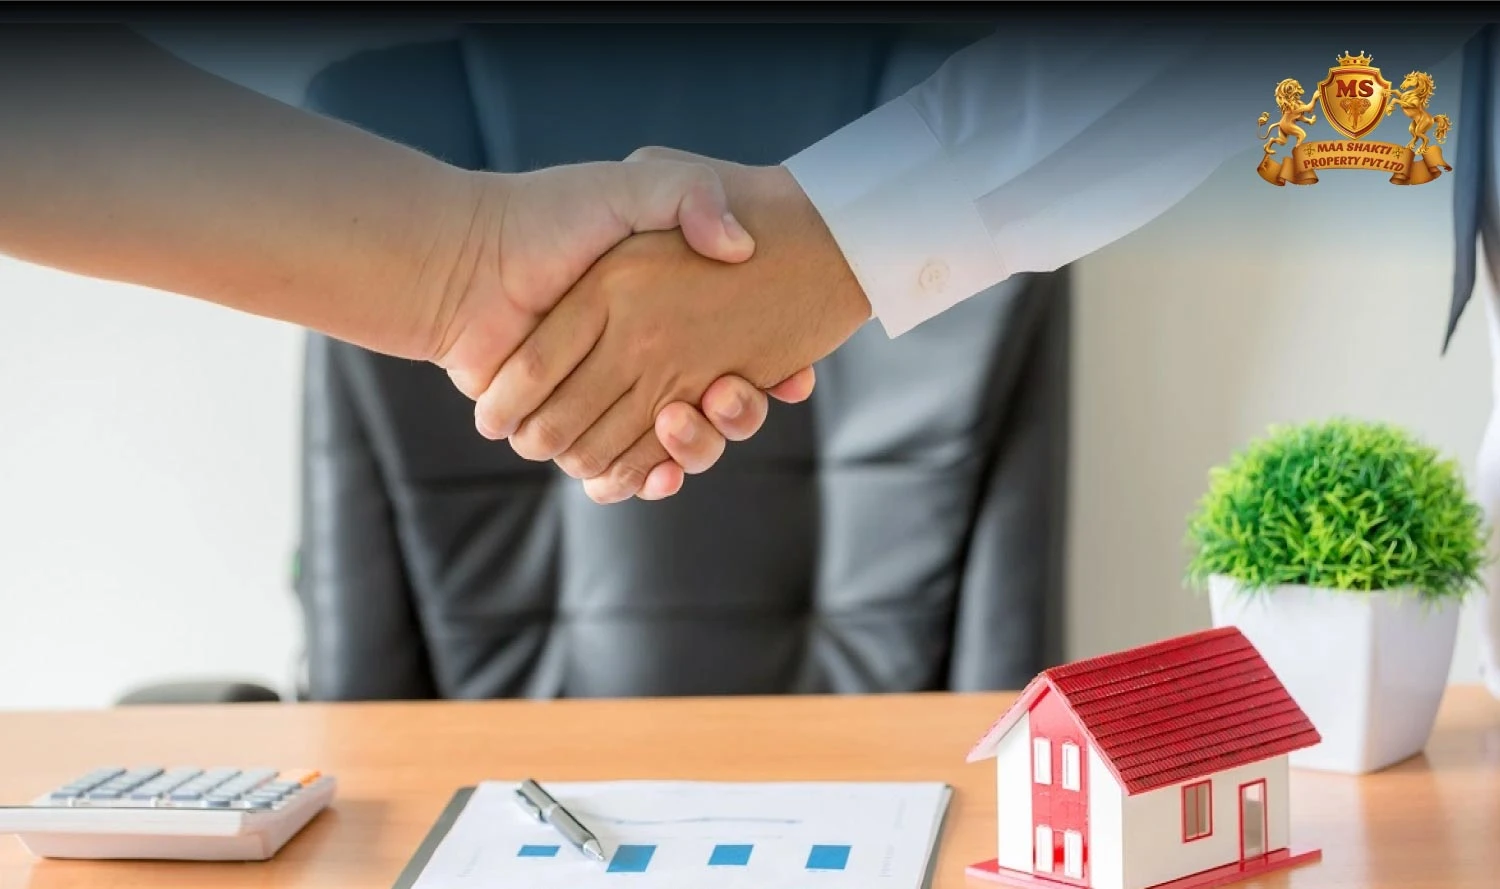 How to Choose the Right Real Estate Advisor for Your Needs